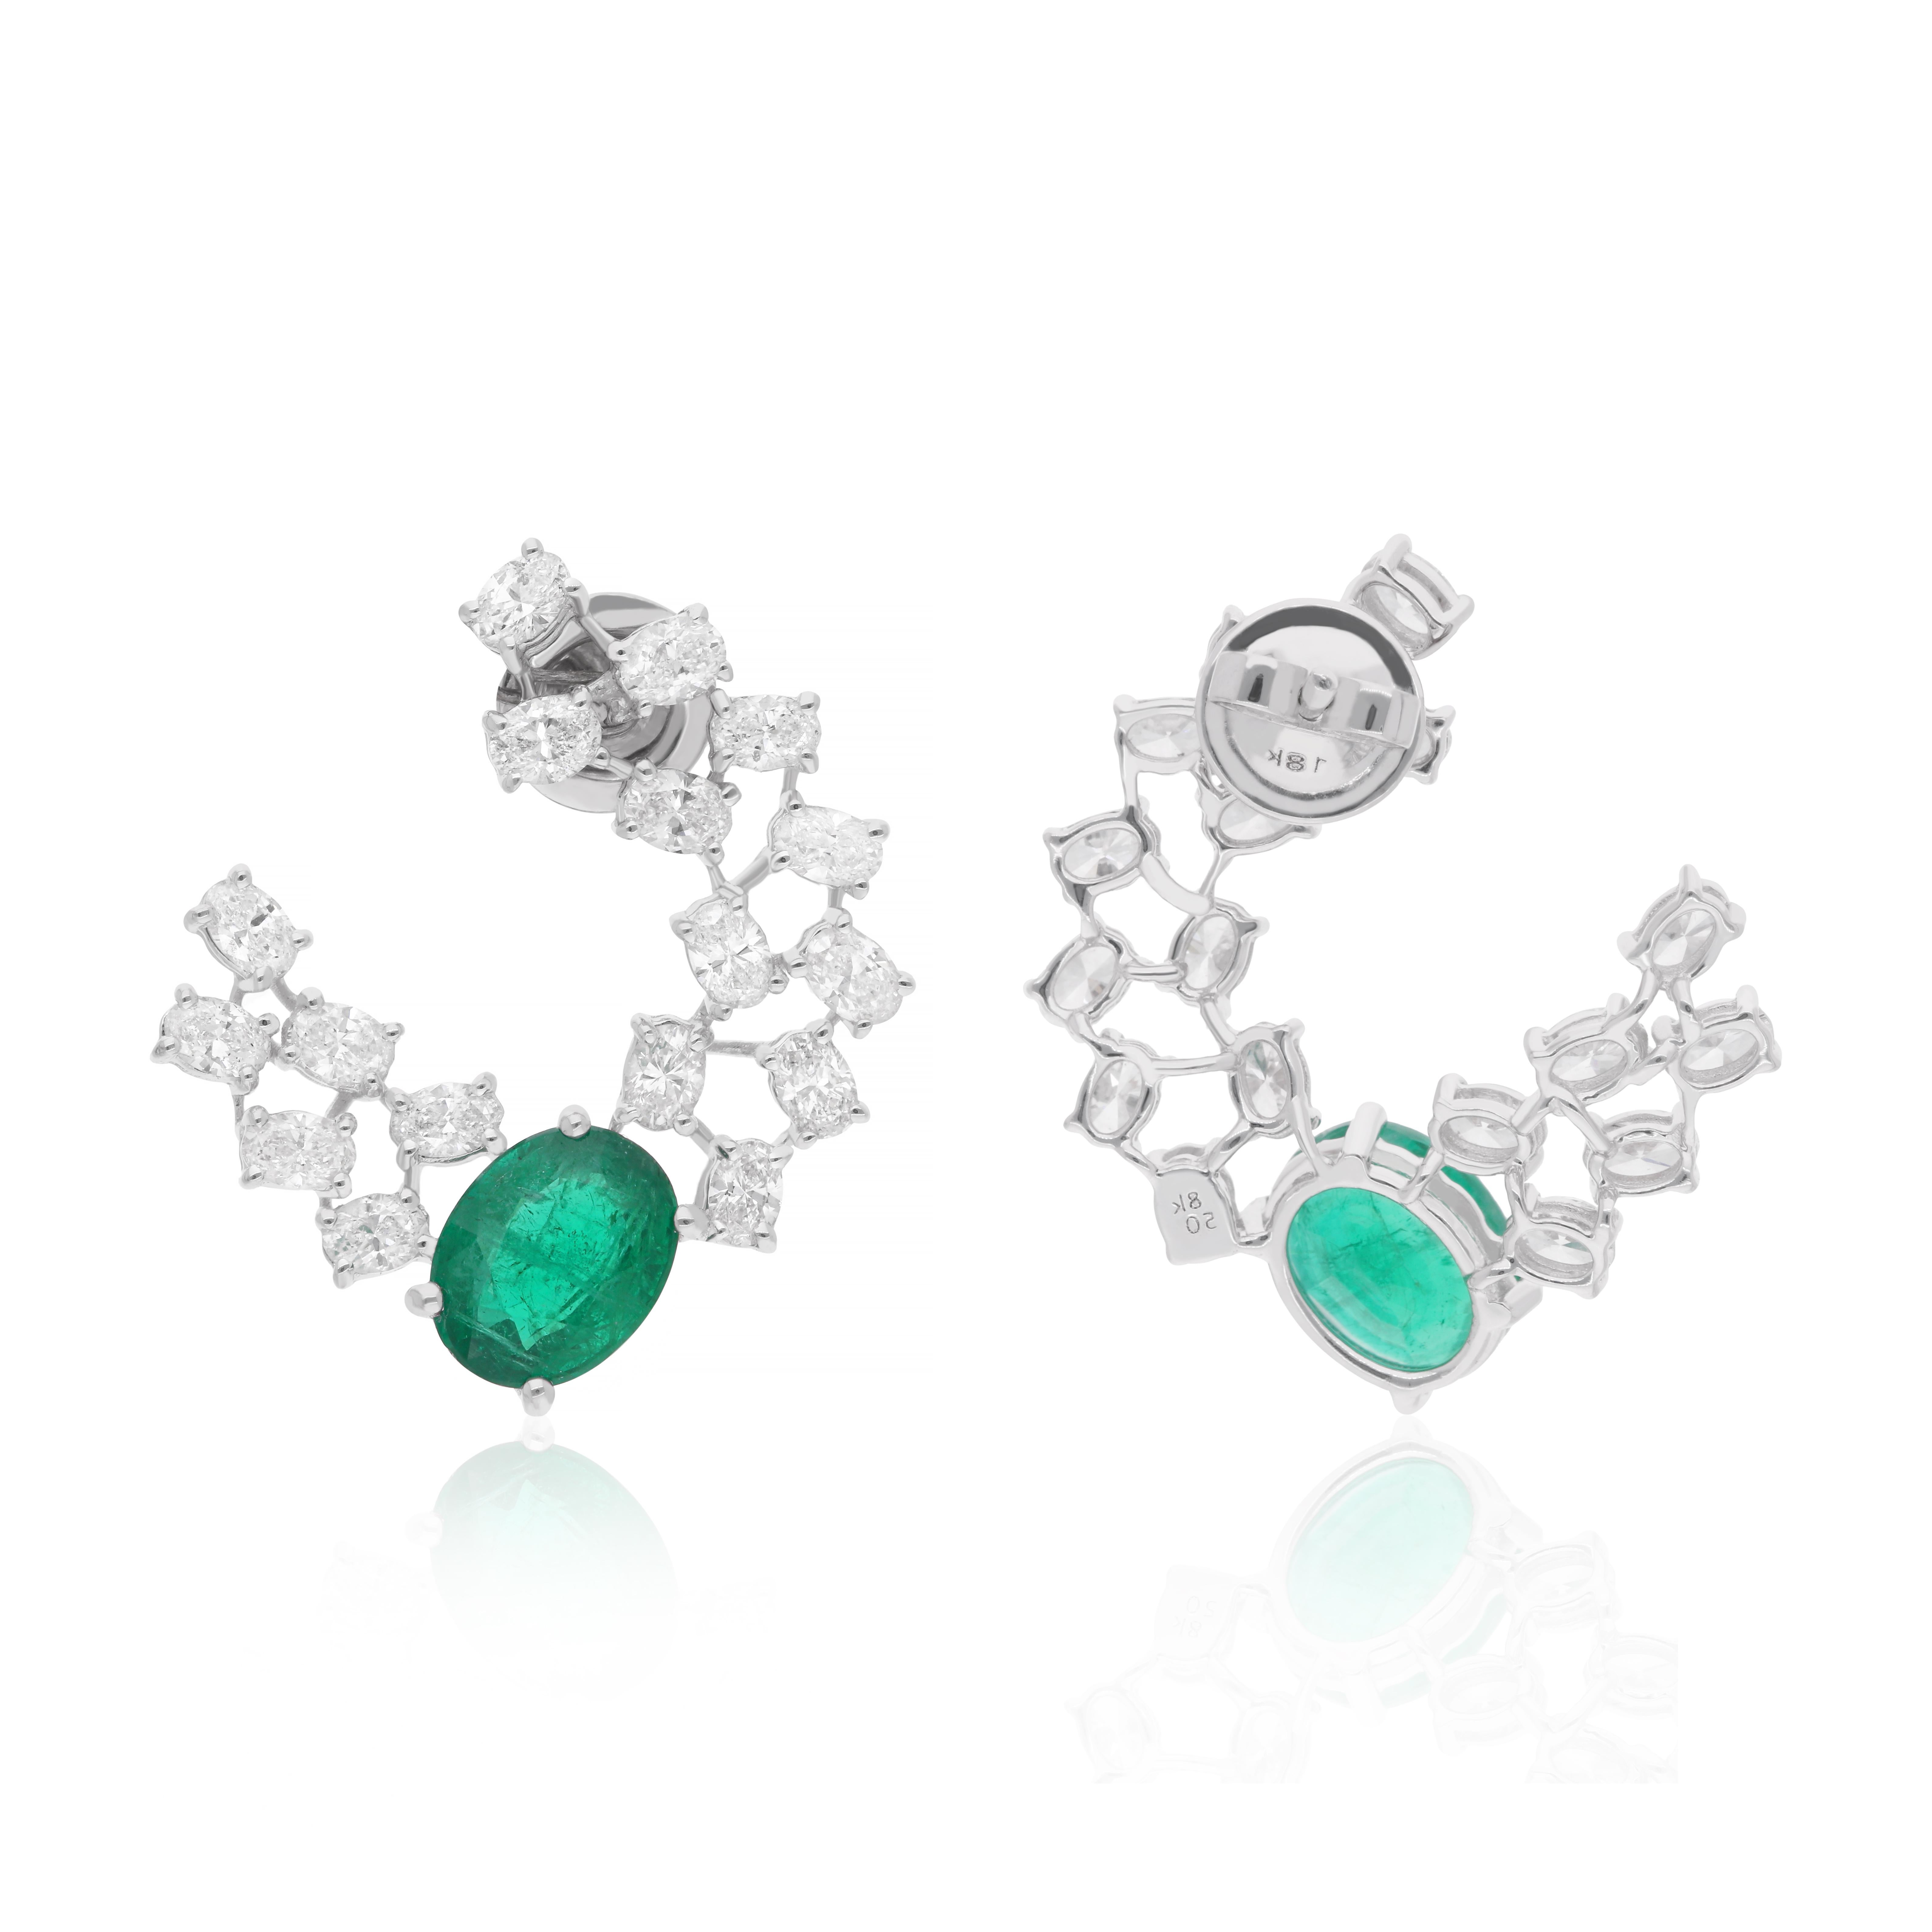 Surrounding the emeralds are dazzling diamonds, meticulously set to enhance their beauty and create a captivating halo effect. Crafted from the finest quality materials, these diamonds shimmer with every movement, adding an extra touch of glamour